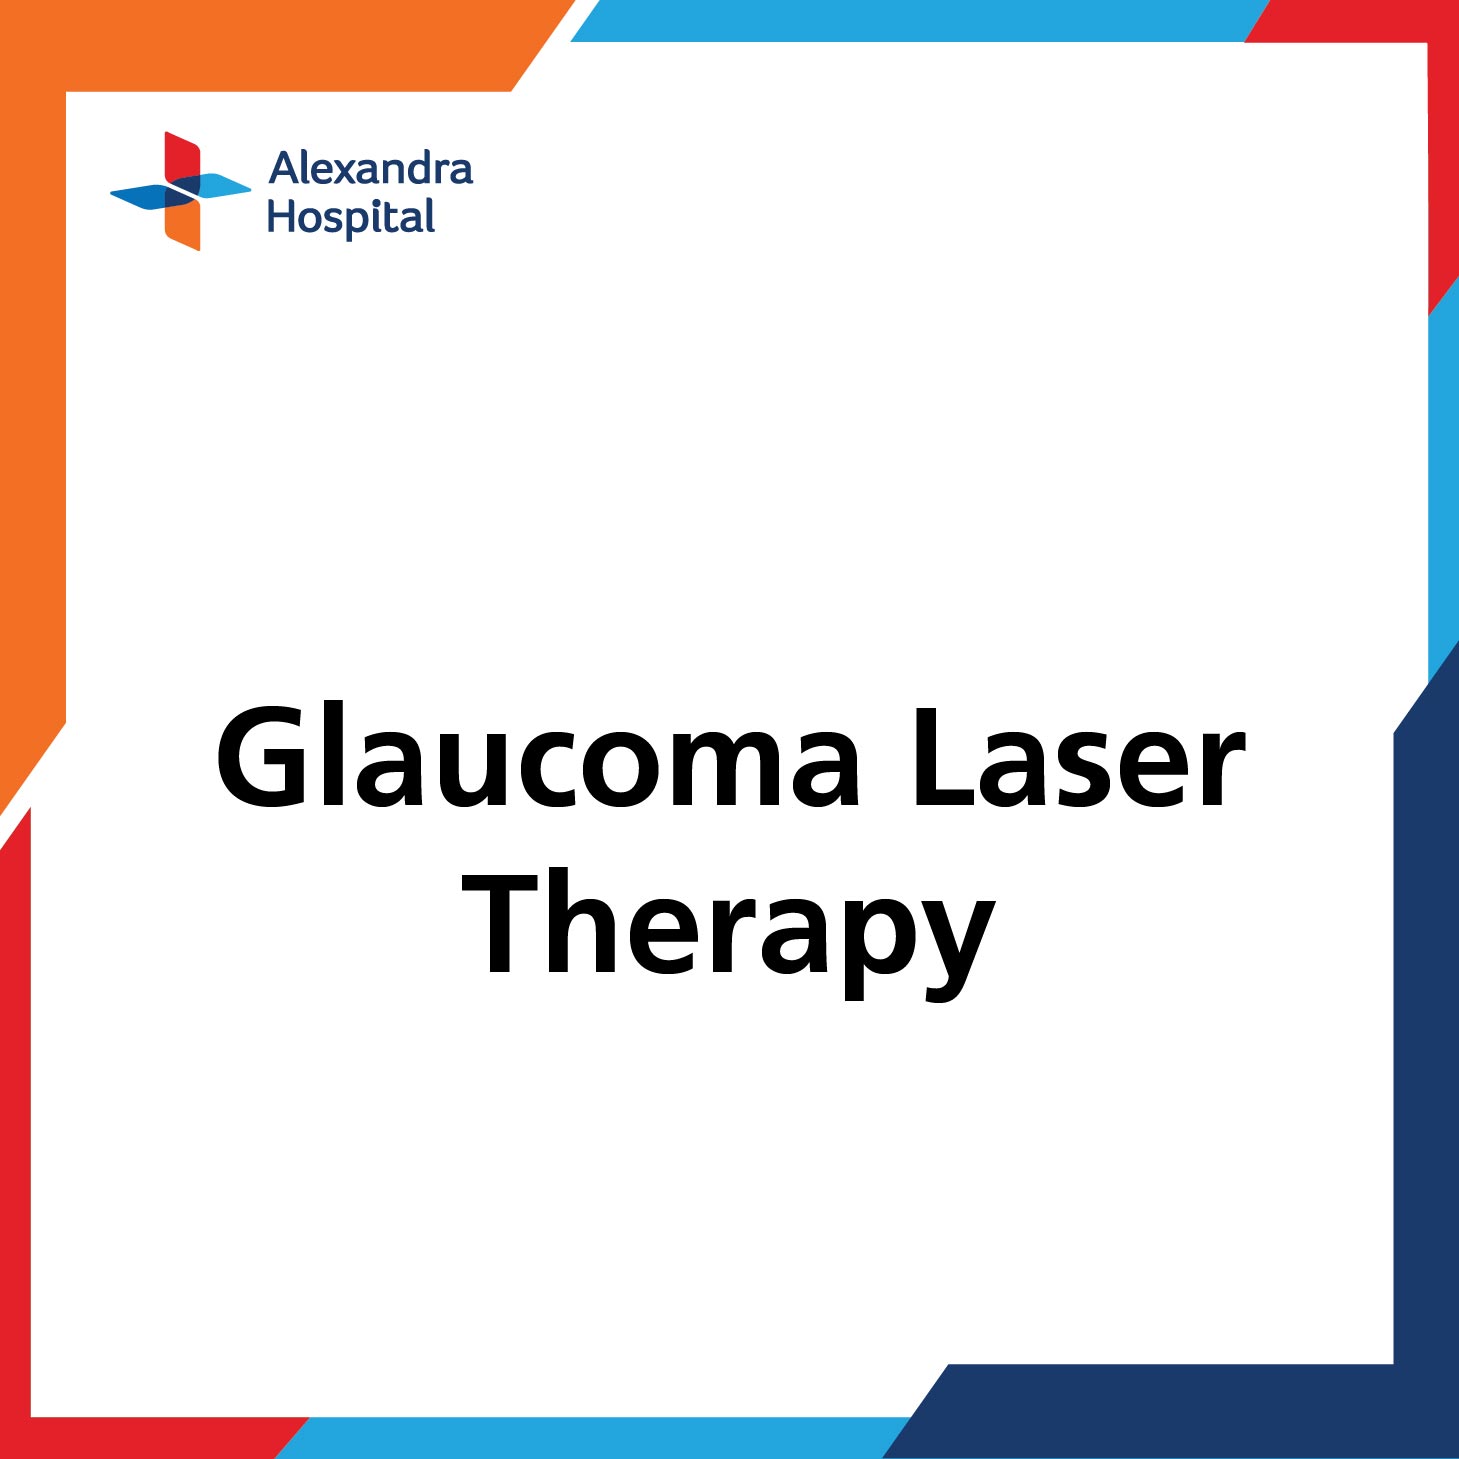 Glaucoma Laser Therapy